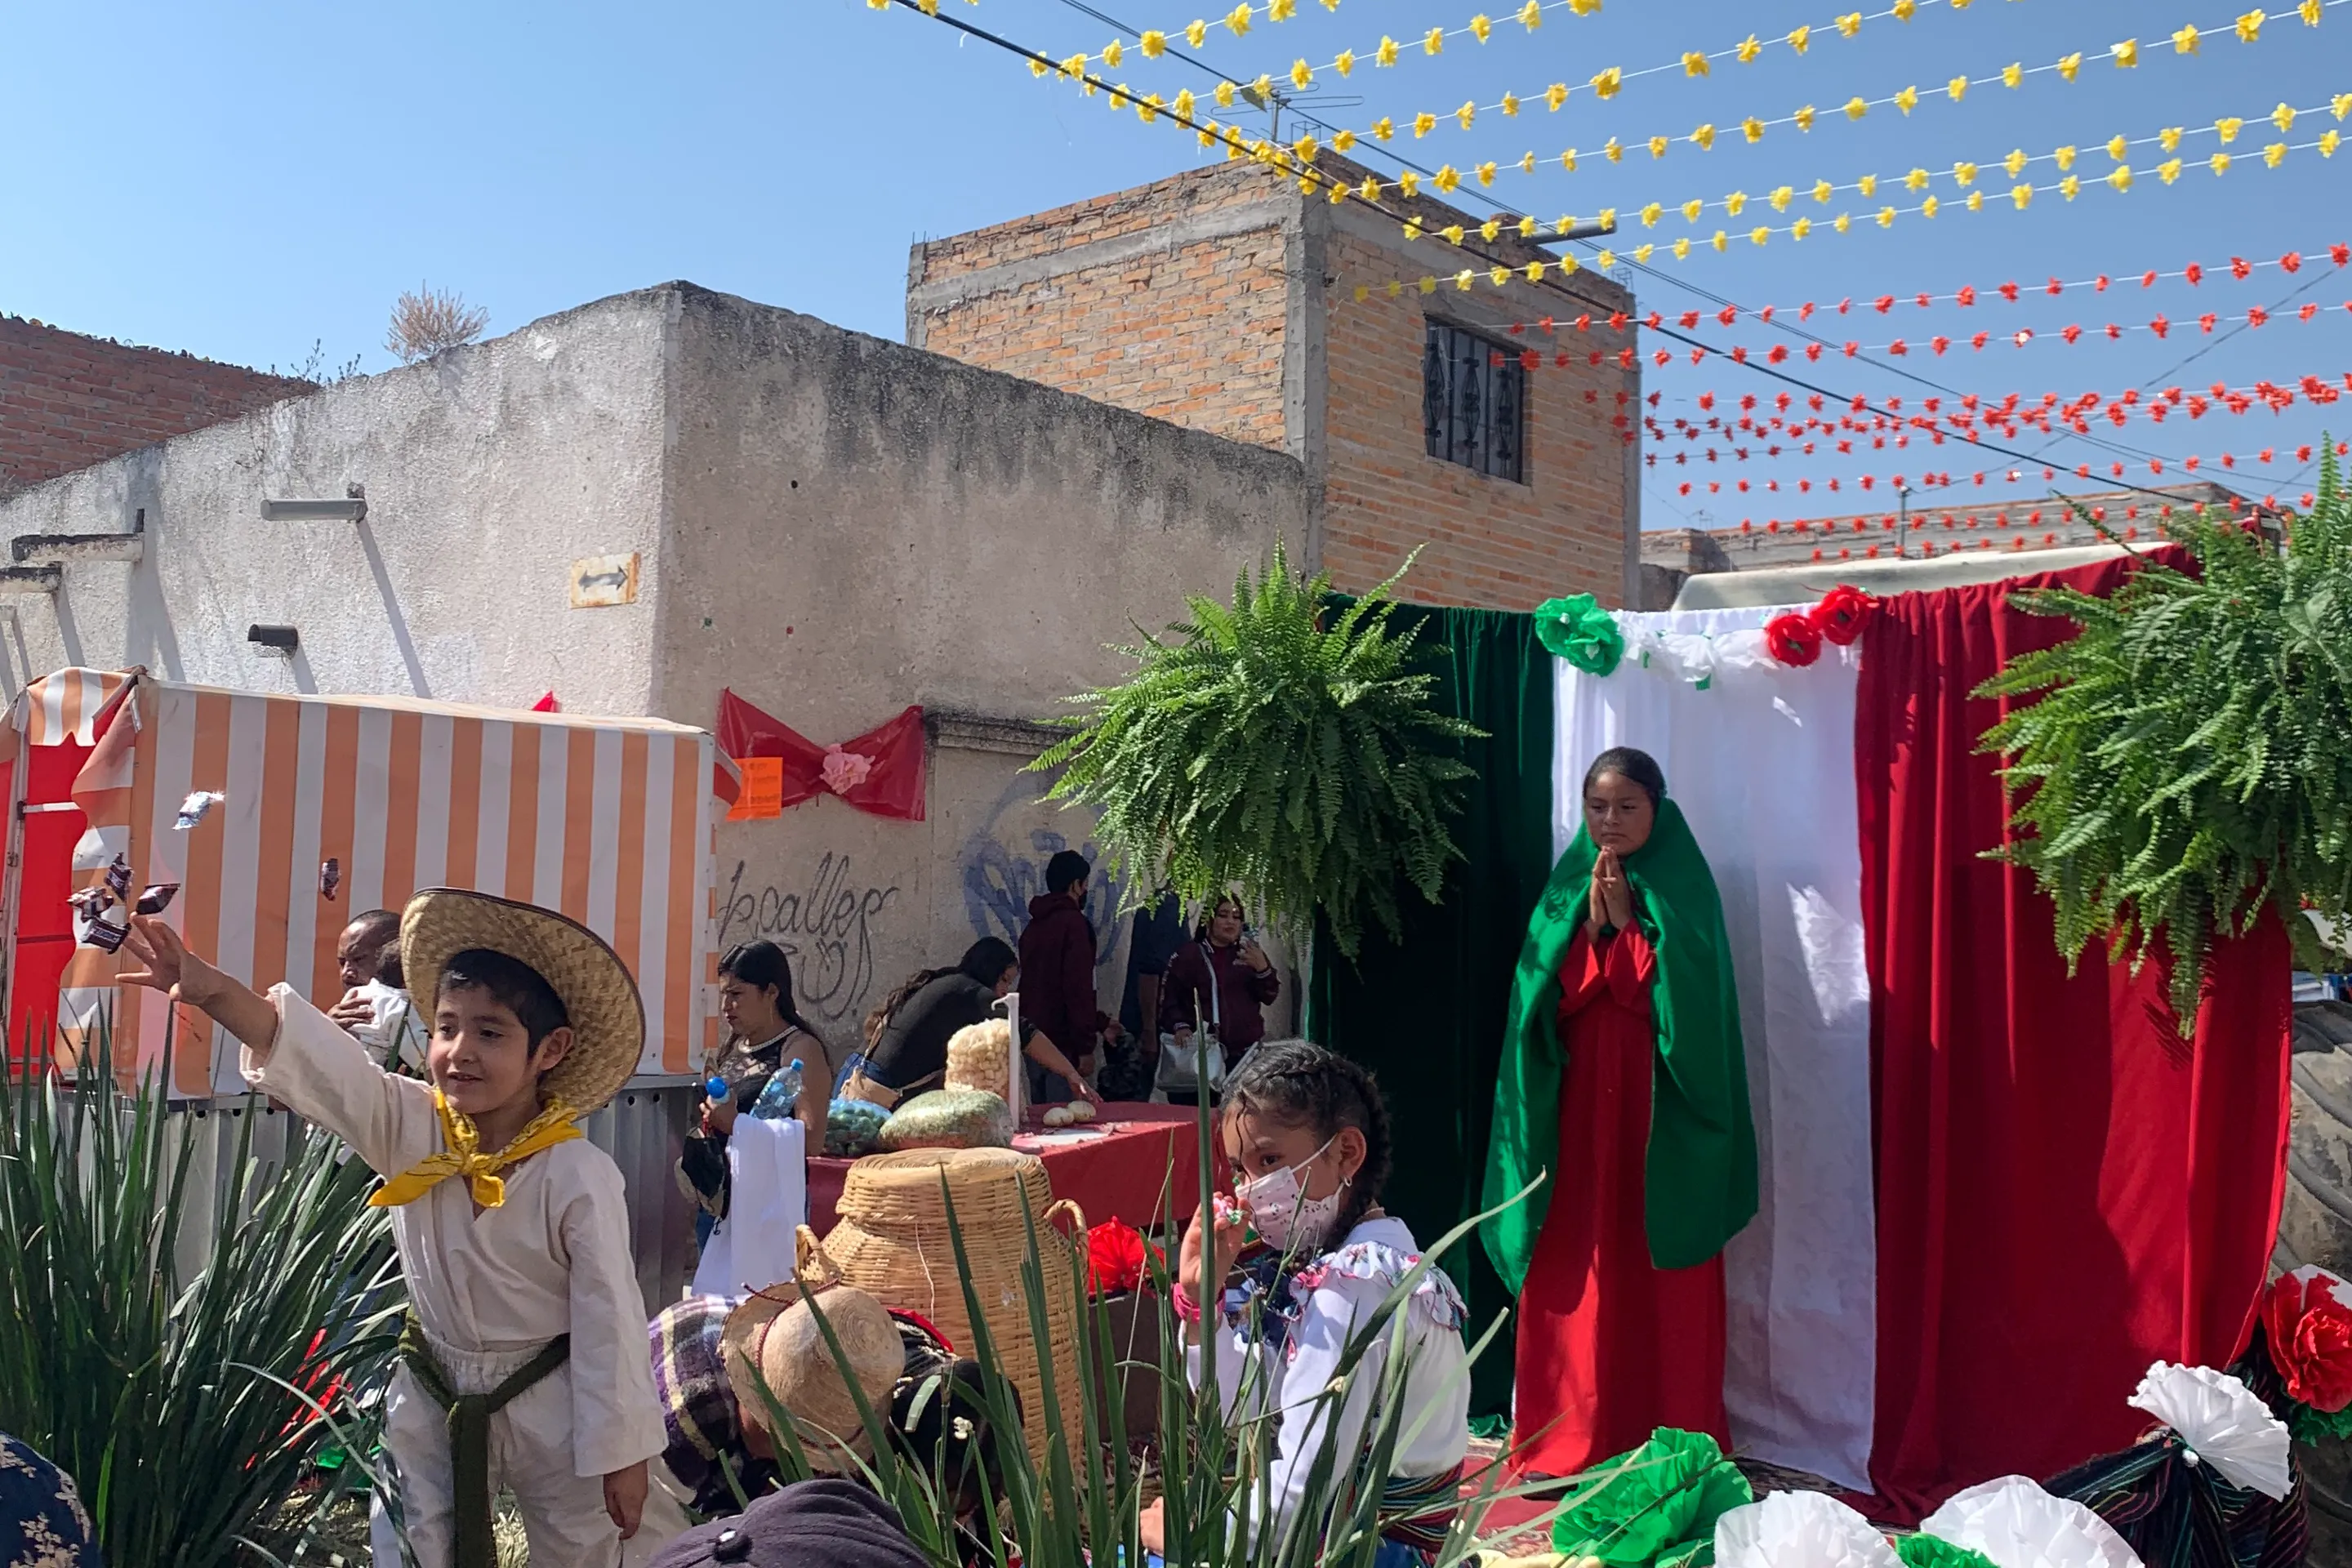 A procession in honor of Our Lady of Guadalupe on Dec. 12, 2021 in a small town in the Mexican state of Guanajuato.?w=200&h=150